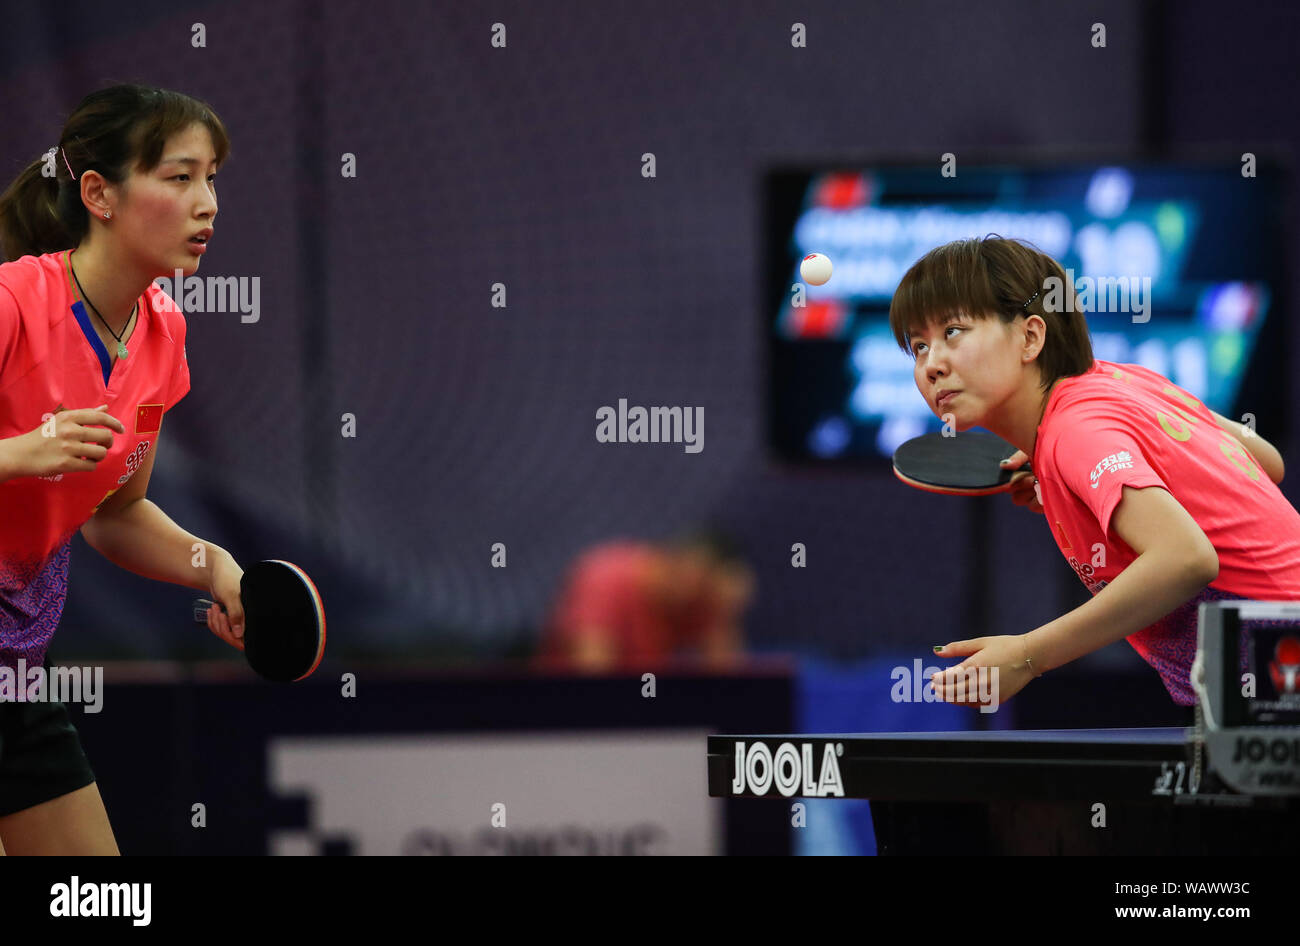 Olomouc, Czech Republic. 22nd Aug, 2019. Chen Xingtong (R)/Qian Tianyi of China compete during a women's doubles round of 16 match against Stephanie Loeuillette/Audrey Zarif of France during 2019 ITTF Czech Open in Olomouc, the Czech Republic, Aug. 22, 2019. Credit: Shan Yuqi/Xinhua/Alamy Live News Stock Photo